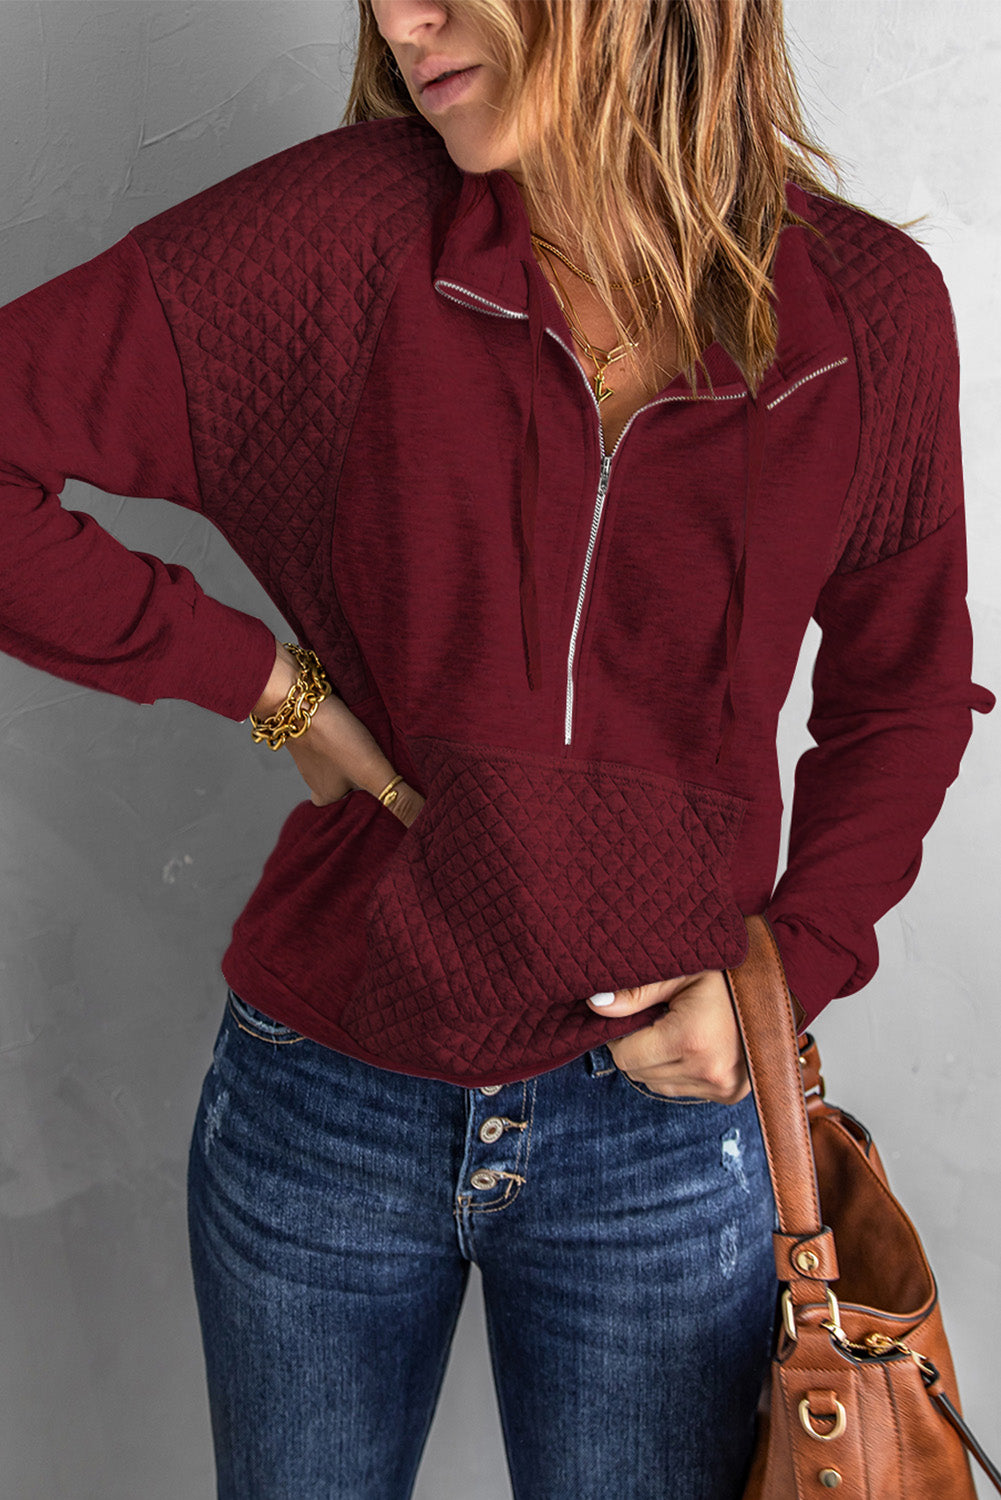 Quilted Half-Zip Sweatshirt 4 colors - The Lakeside Boutique